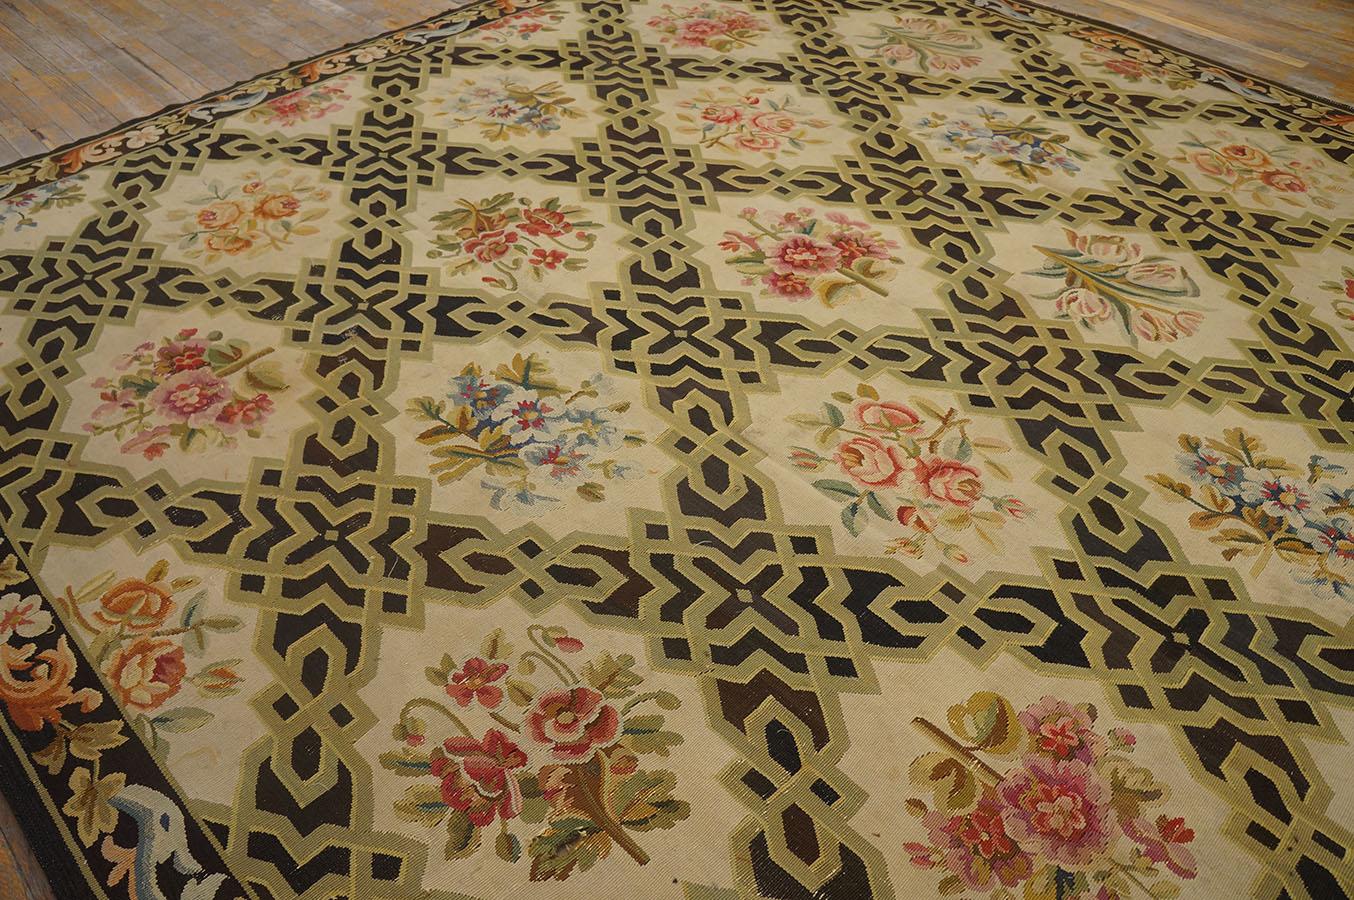 Early 20th Century French Aubusson Carpet ( 9' 8'' x 15' 3'' - 295 x 465 cm ) For Sale 12